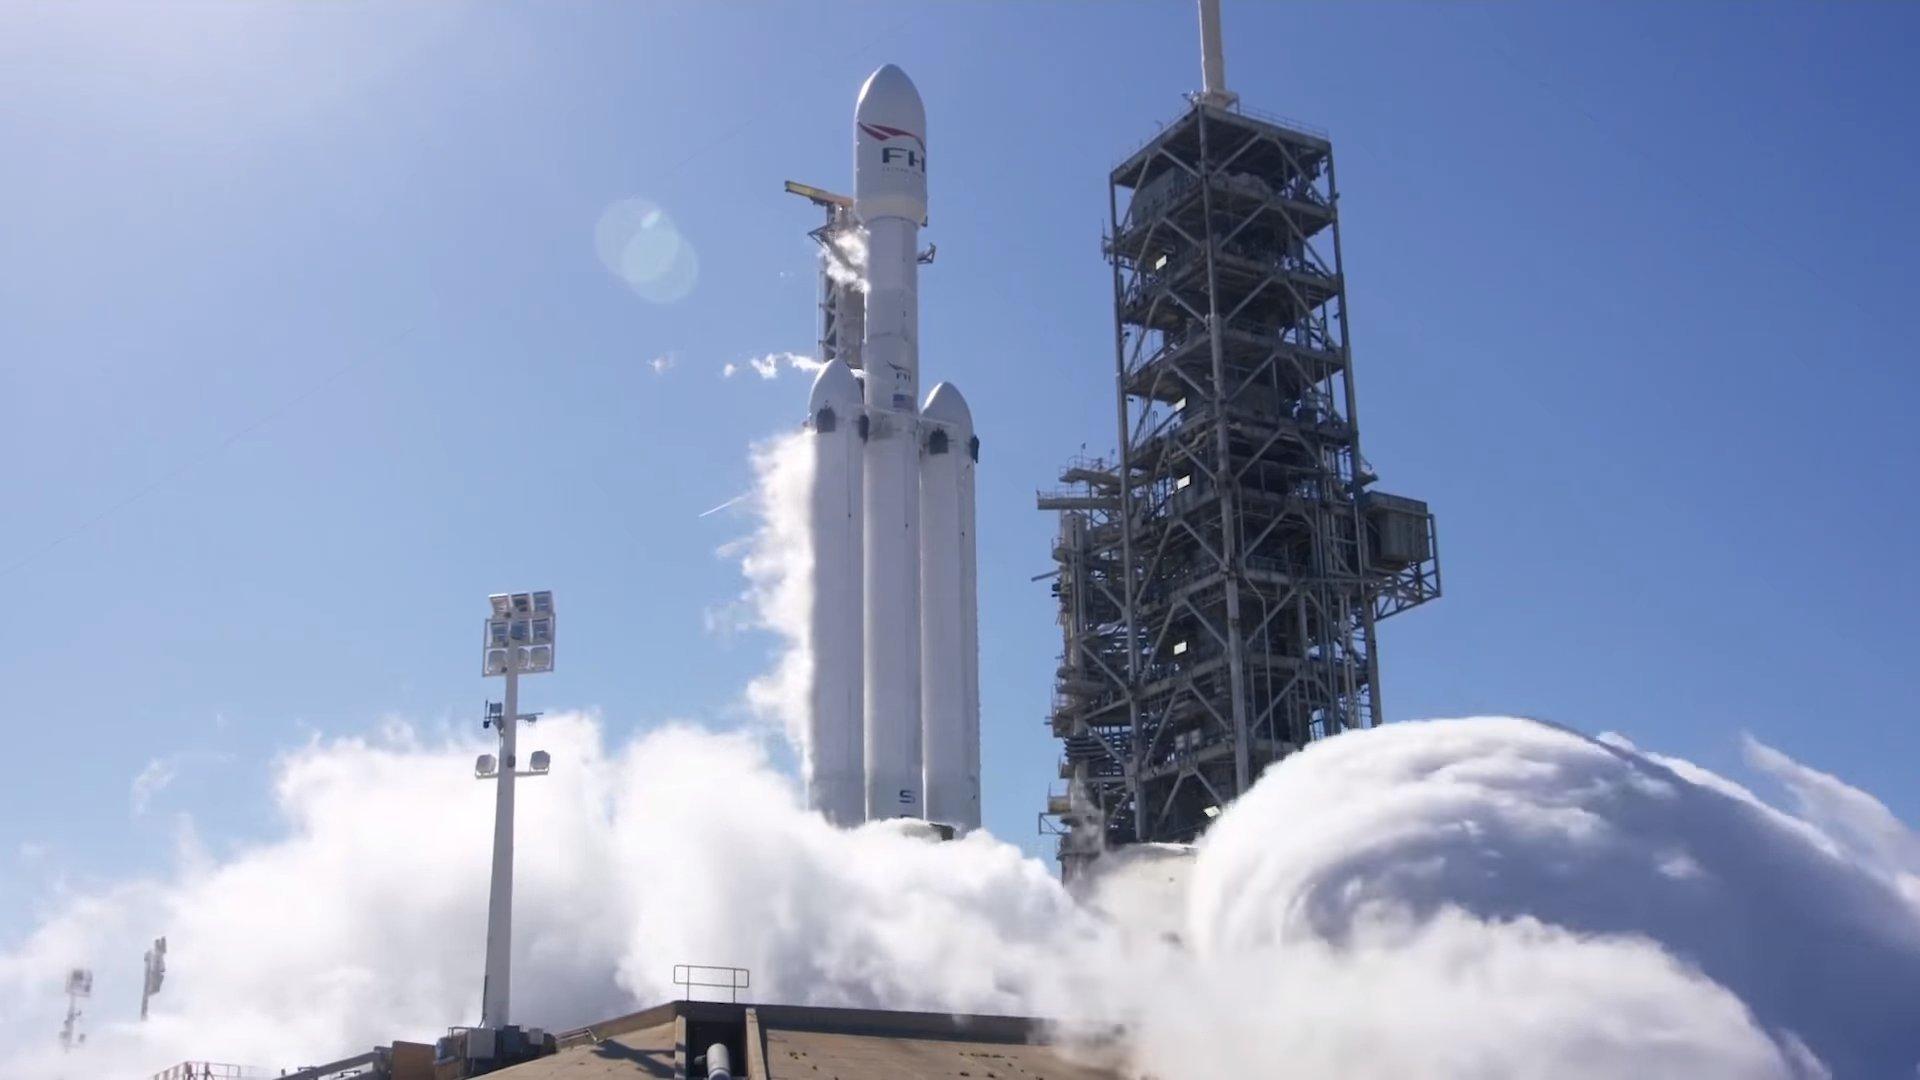 SpaceX tests the Falcon Heavy's 27 engines ahead of first launch